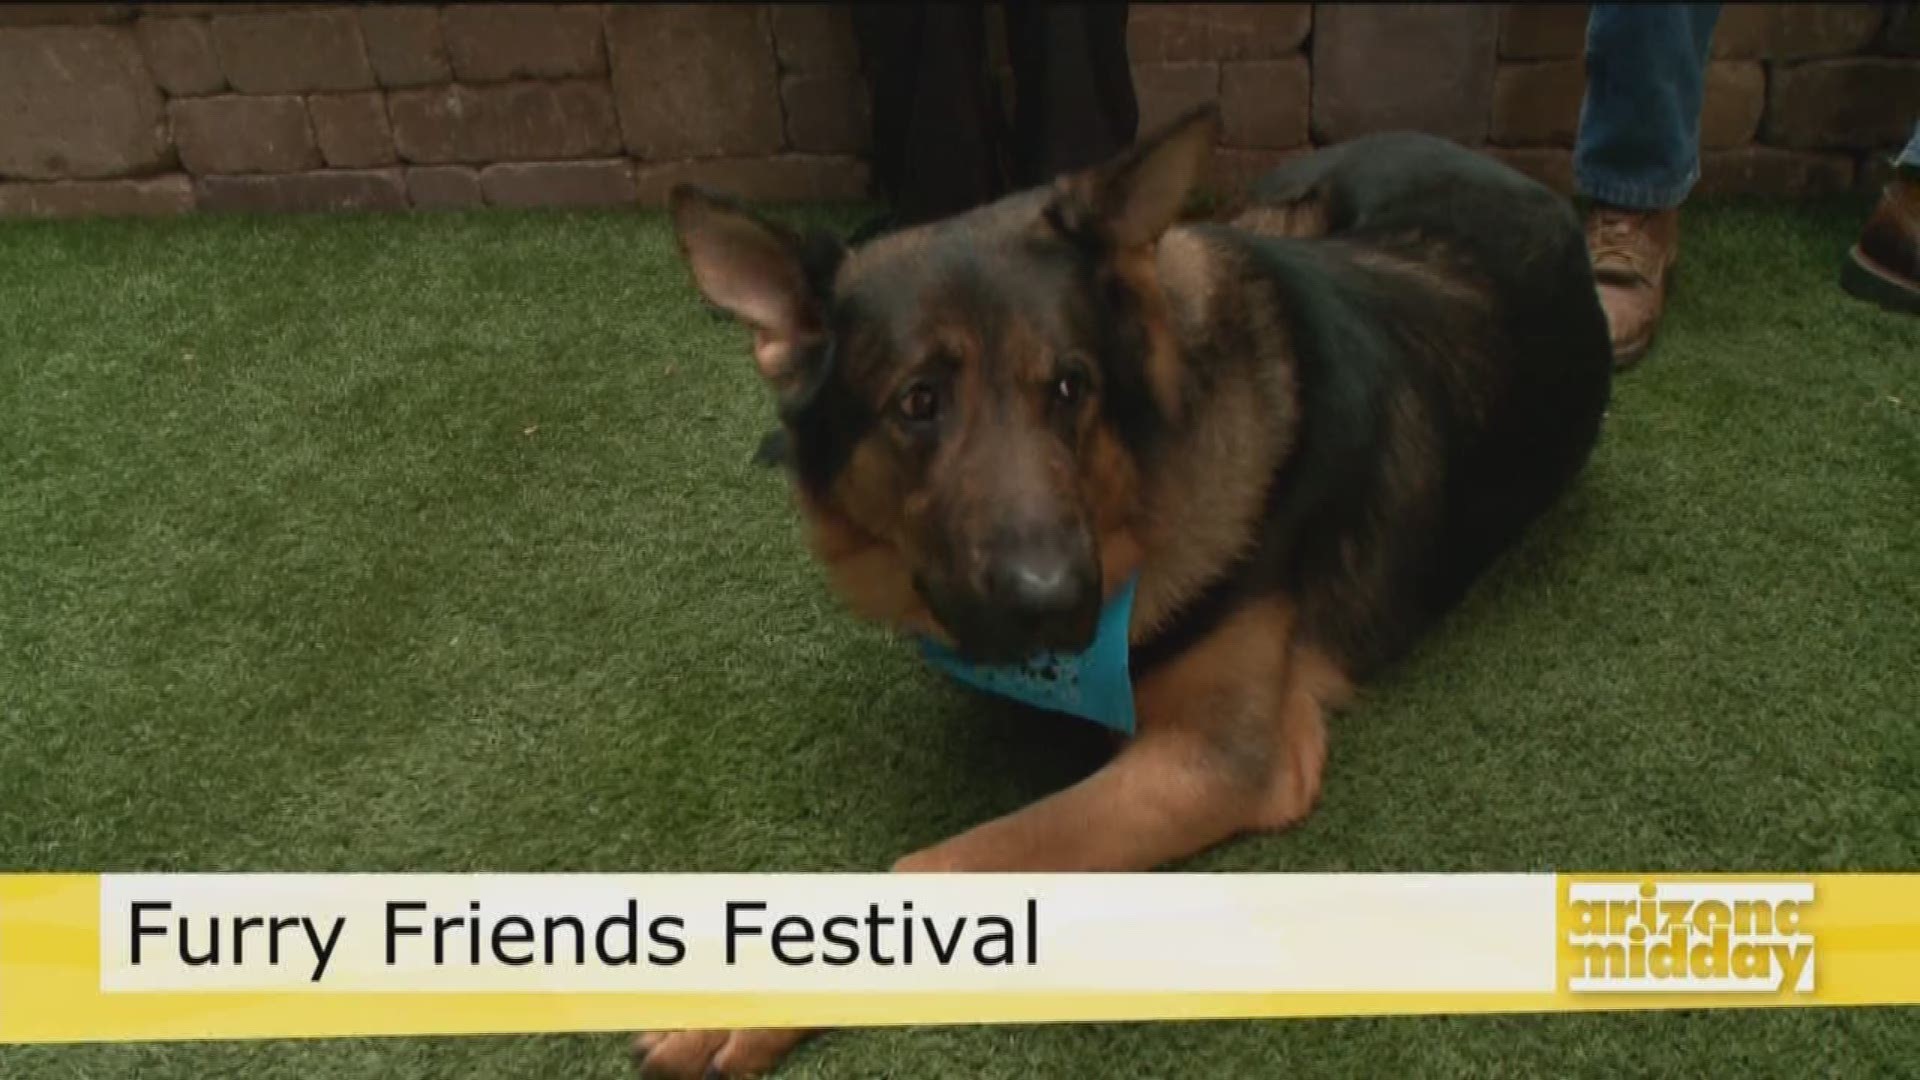 Brittany Rescue AZ's Robin Smith gives us a sneak peek of the Furry Friends Festival that begins this weekend